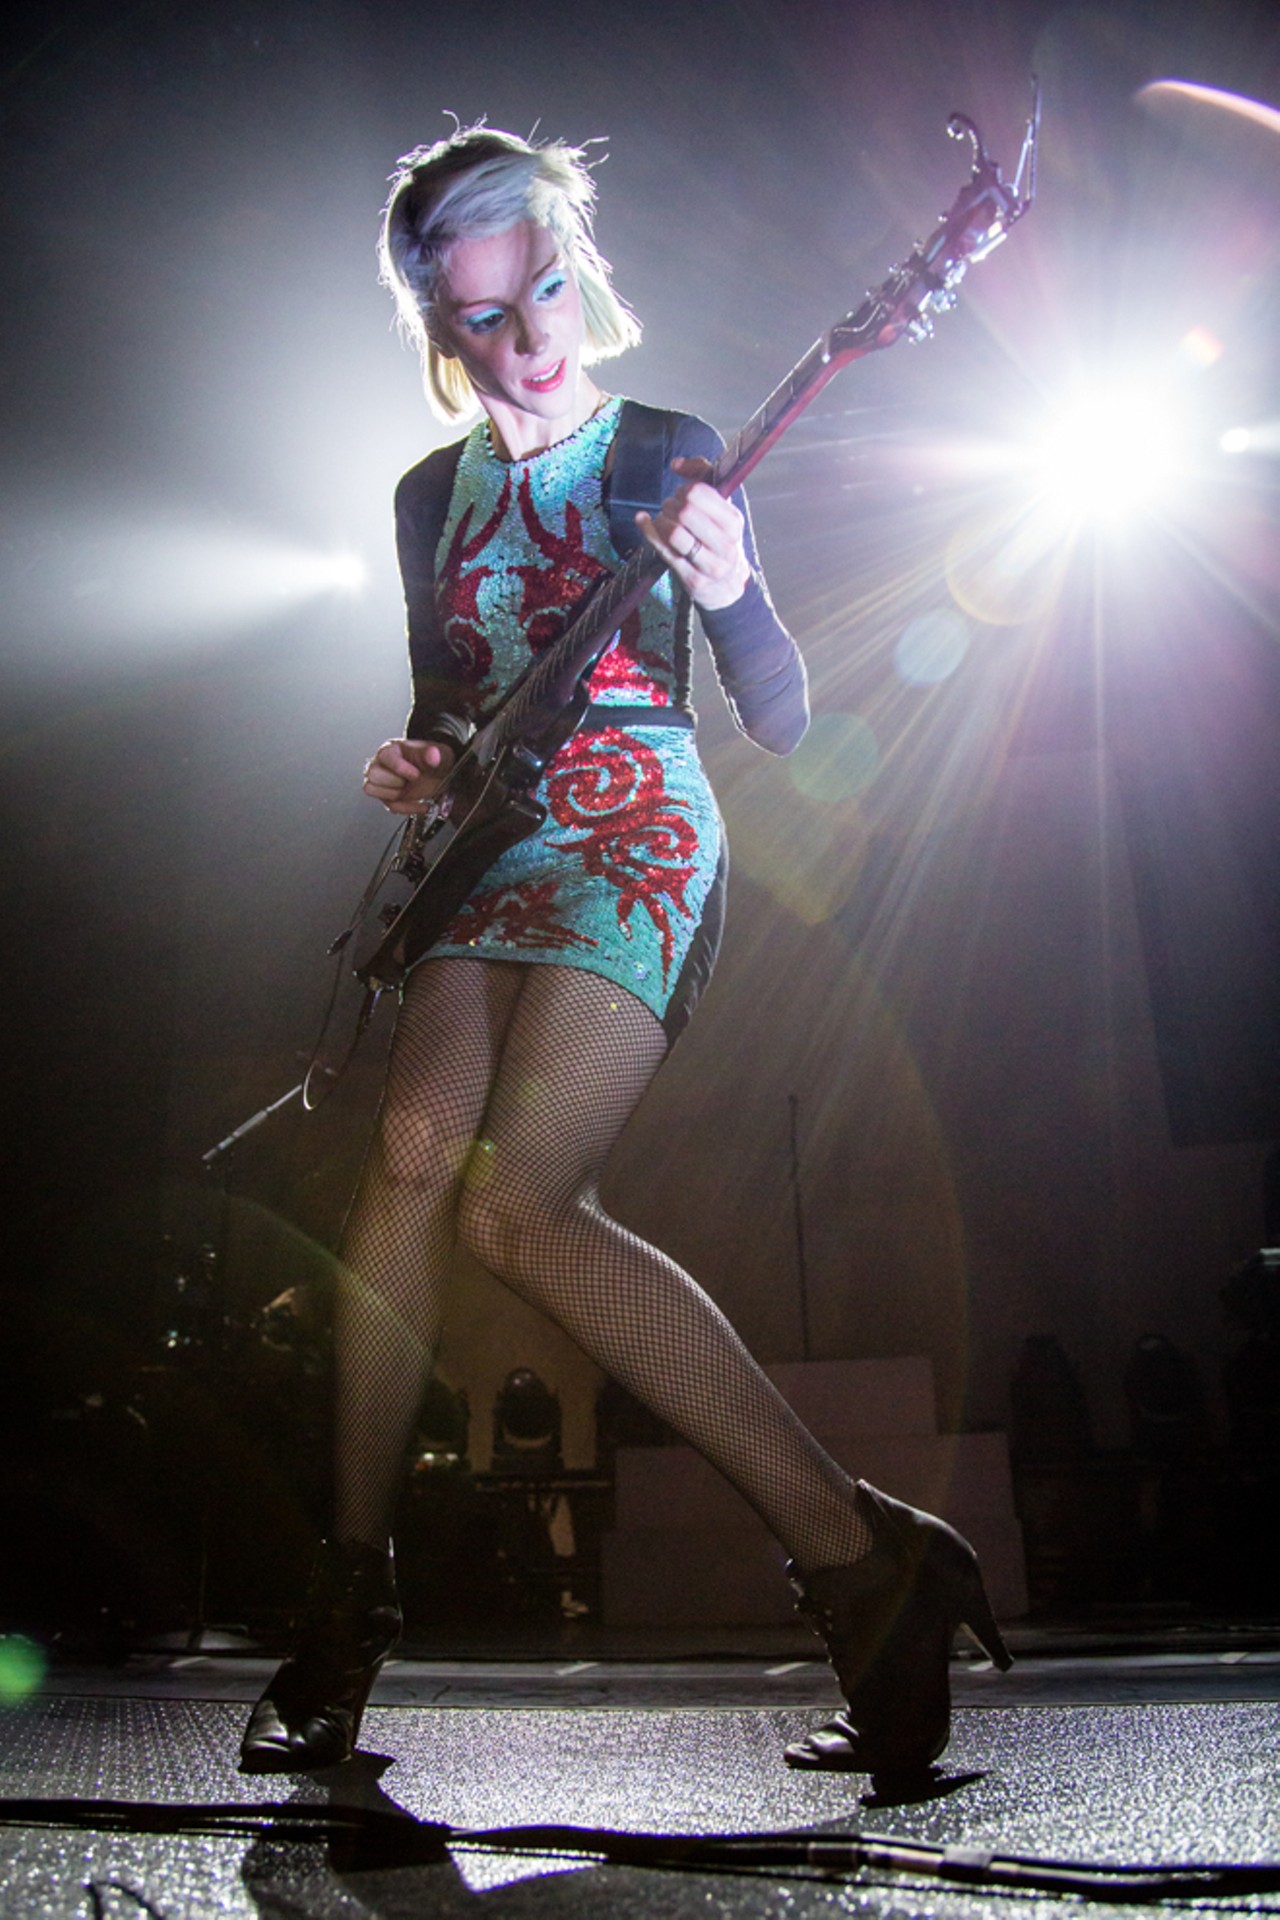 St. Vincent (jump to see more photos of St. Vincent)